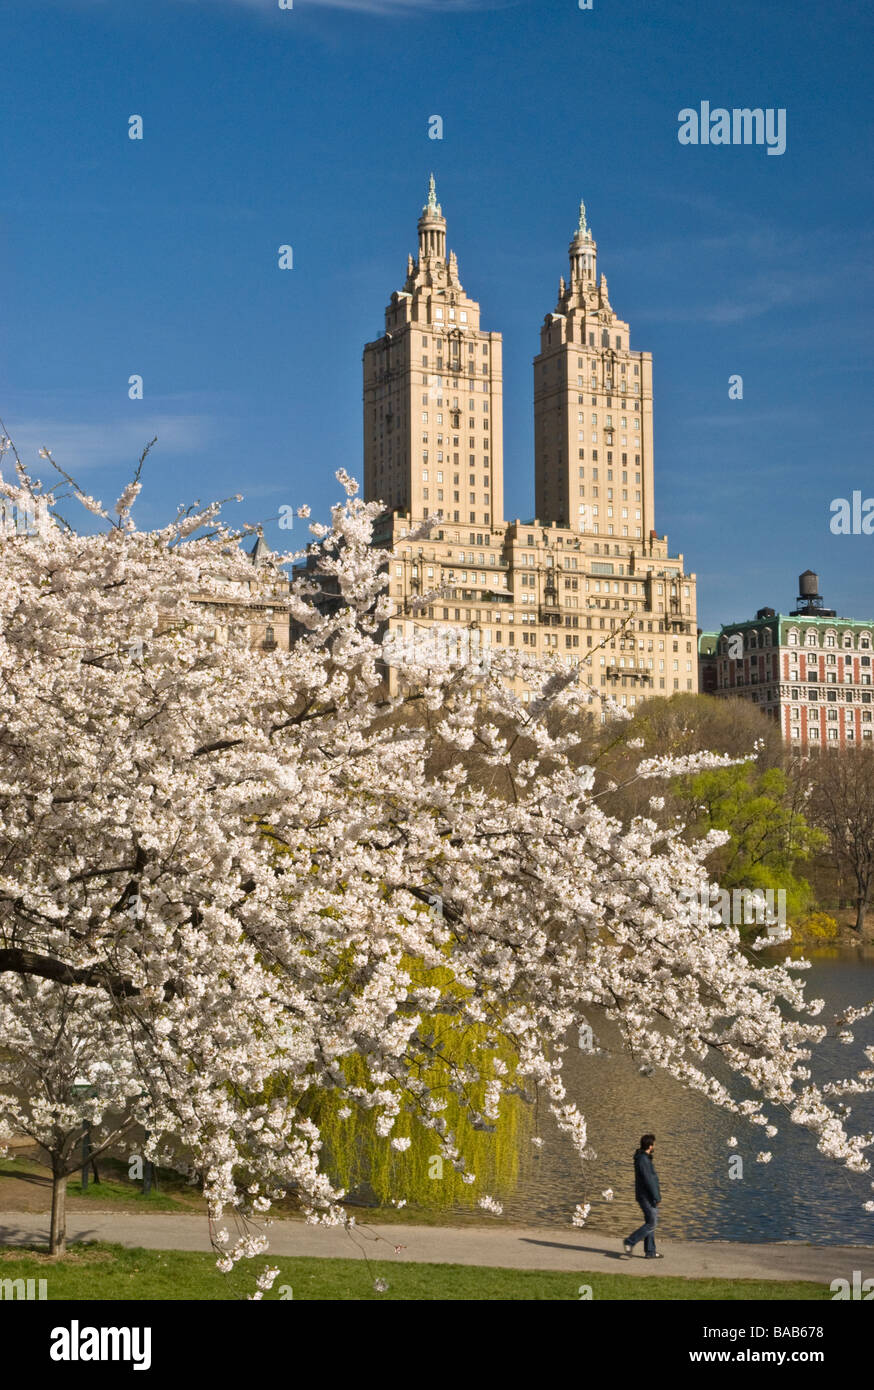 The San Remo Building Overlooking The Lake in Central Park, NYC Stock Photo